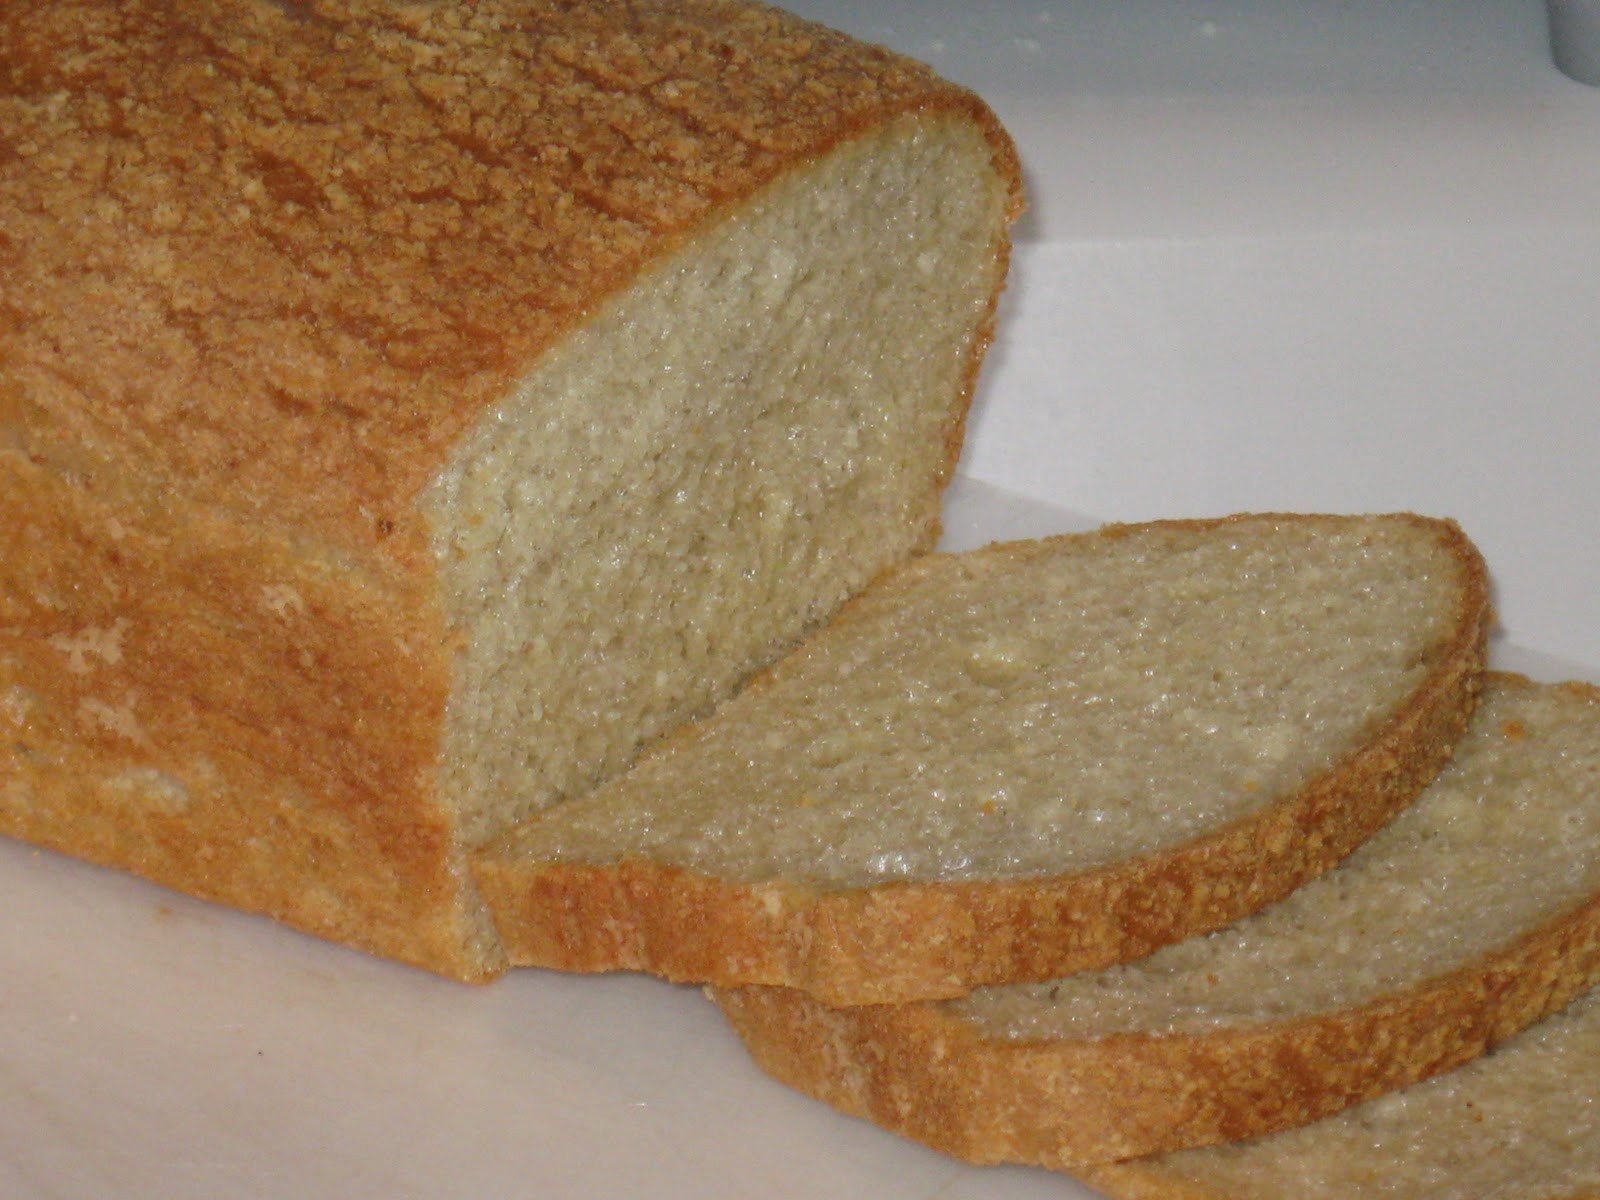 Low Carb Bread Machine Yeast Recipes
 FloridaCharlie Low Carb almond Bread made with BreadMachine